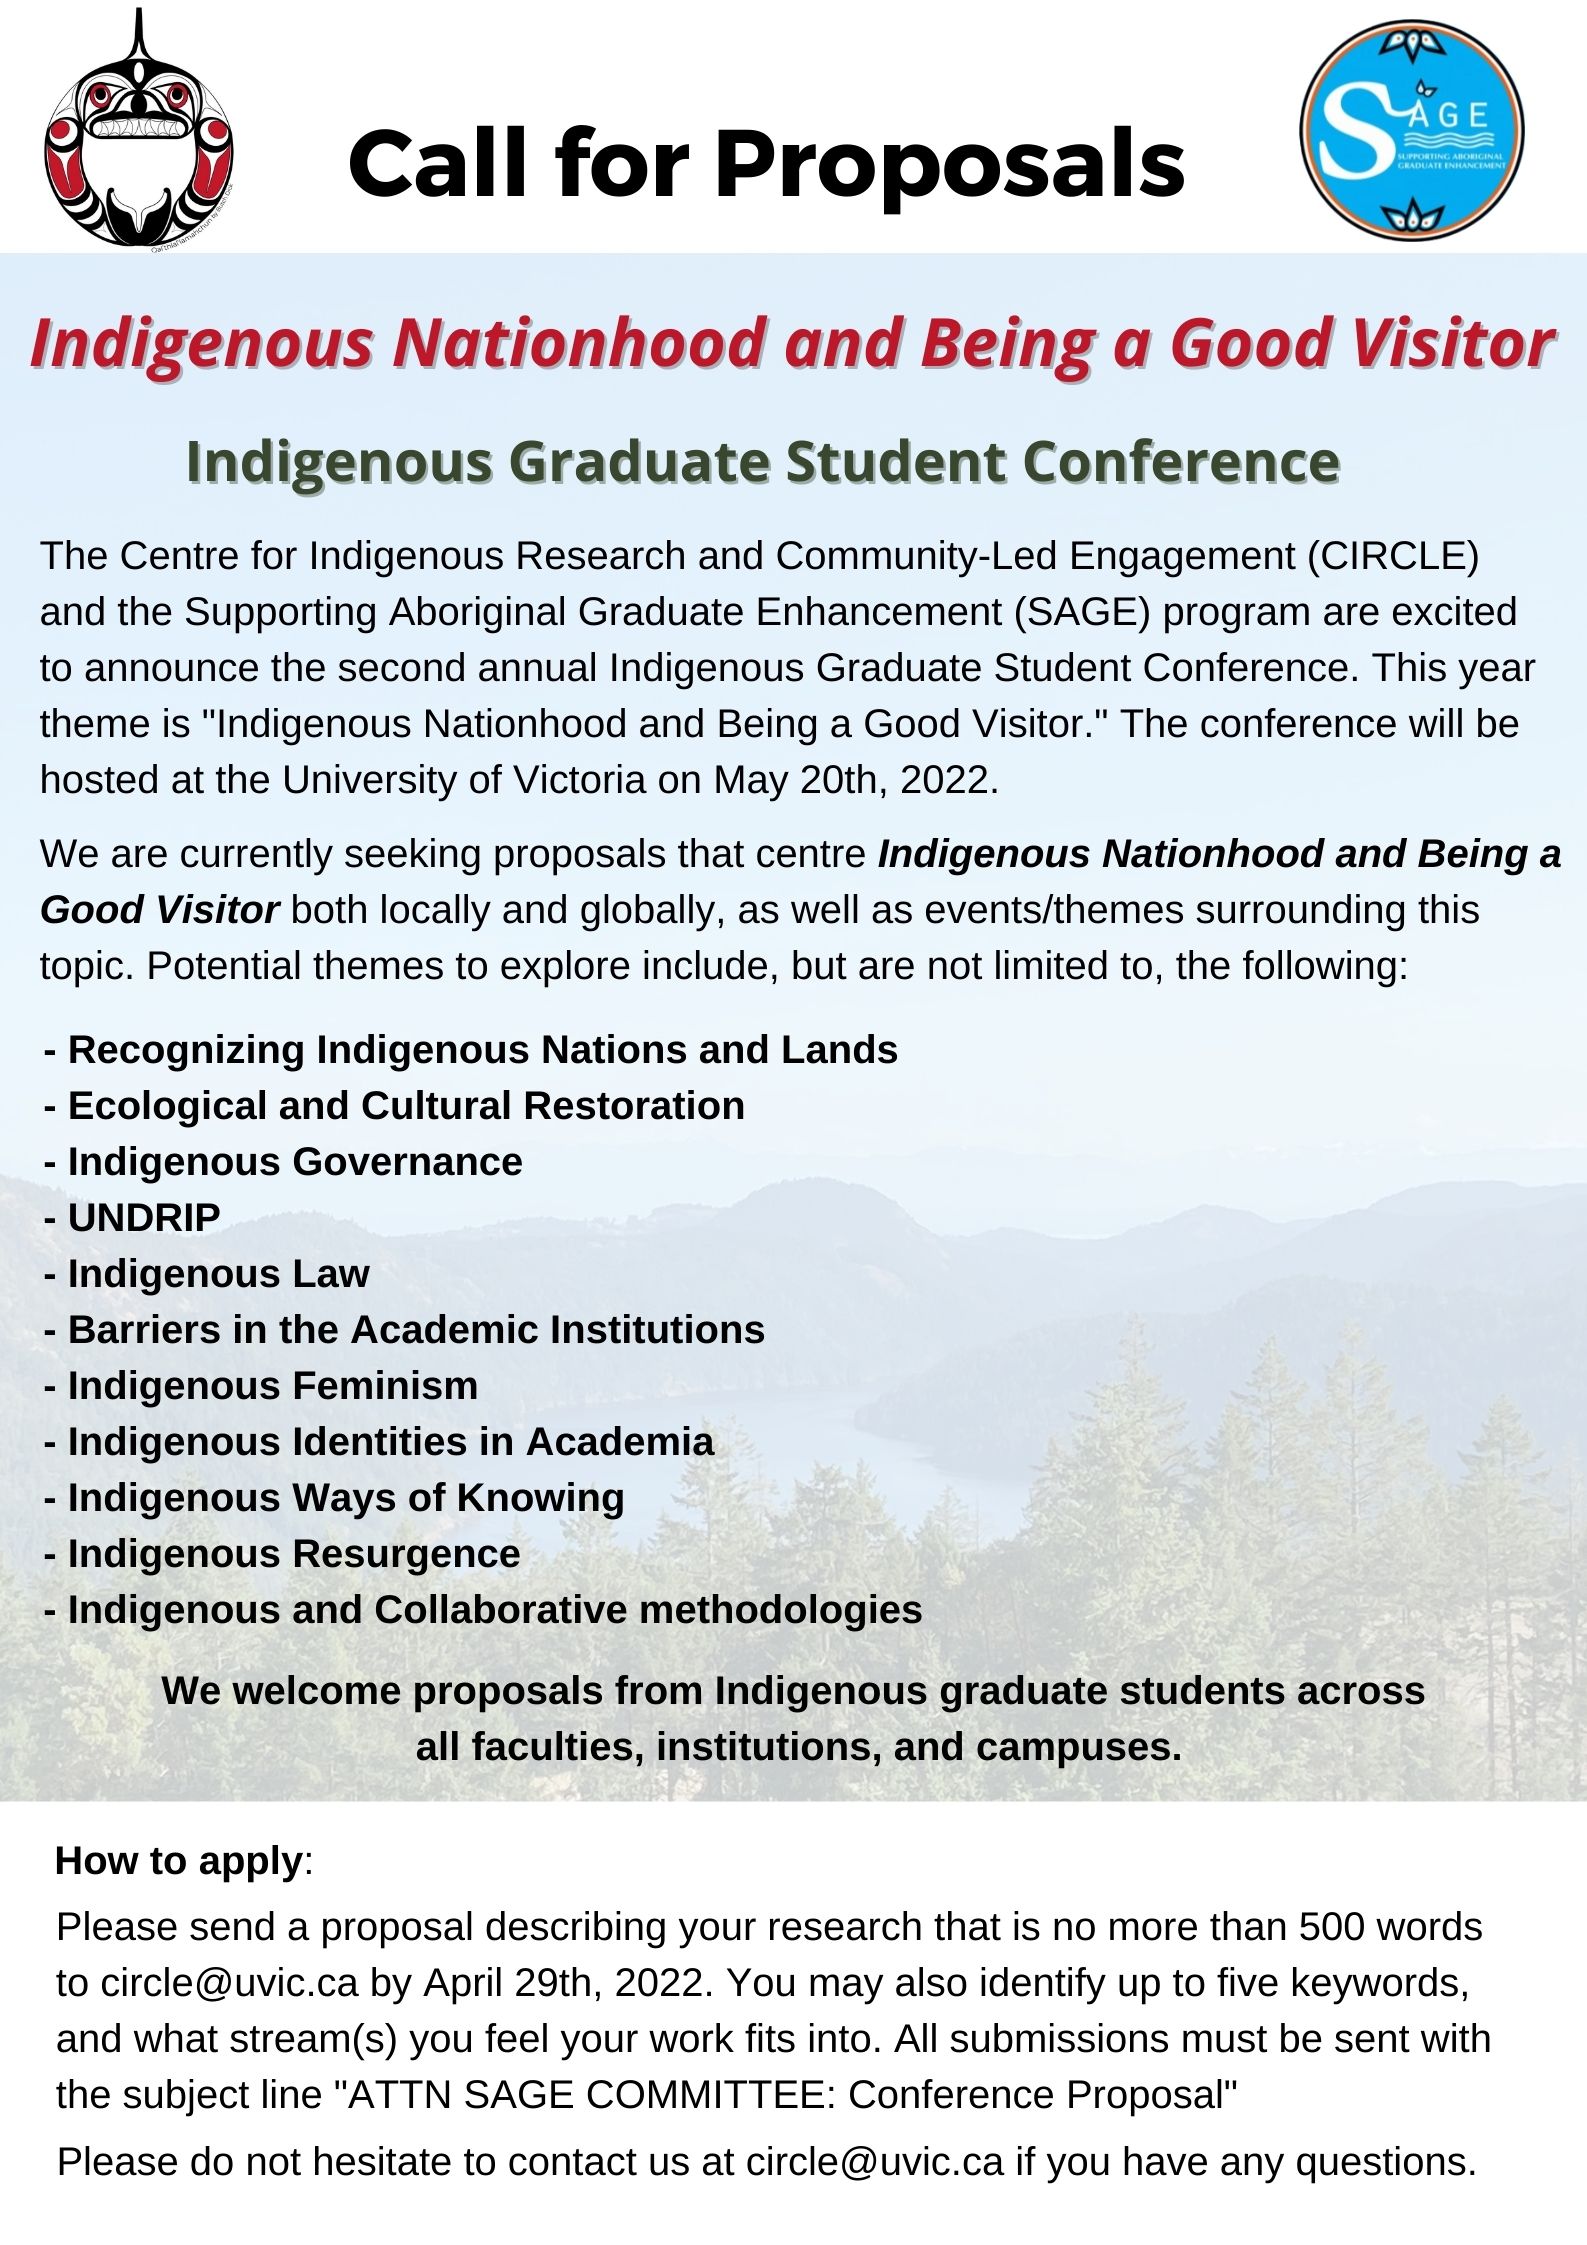 Indigenous Graduate Student Conference Call for proposals